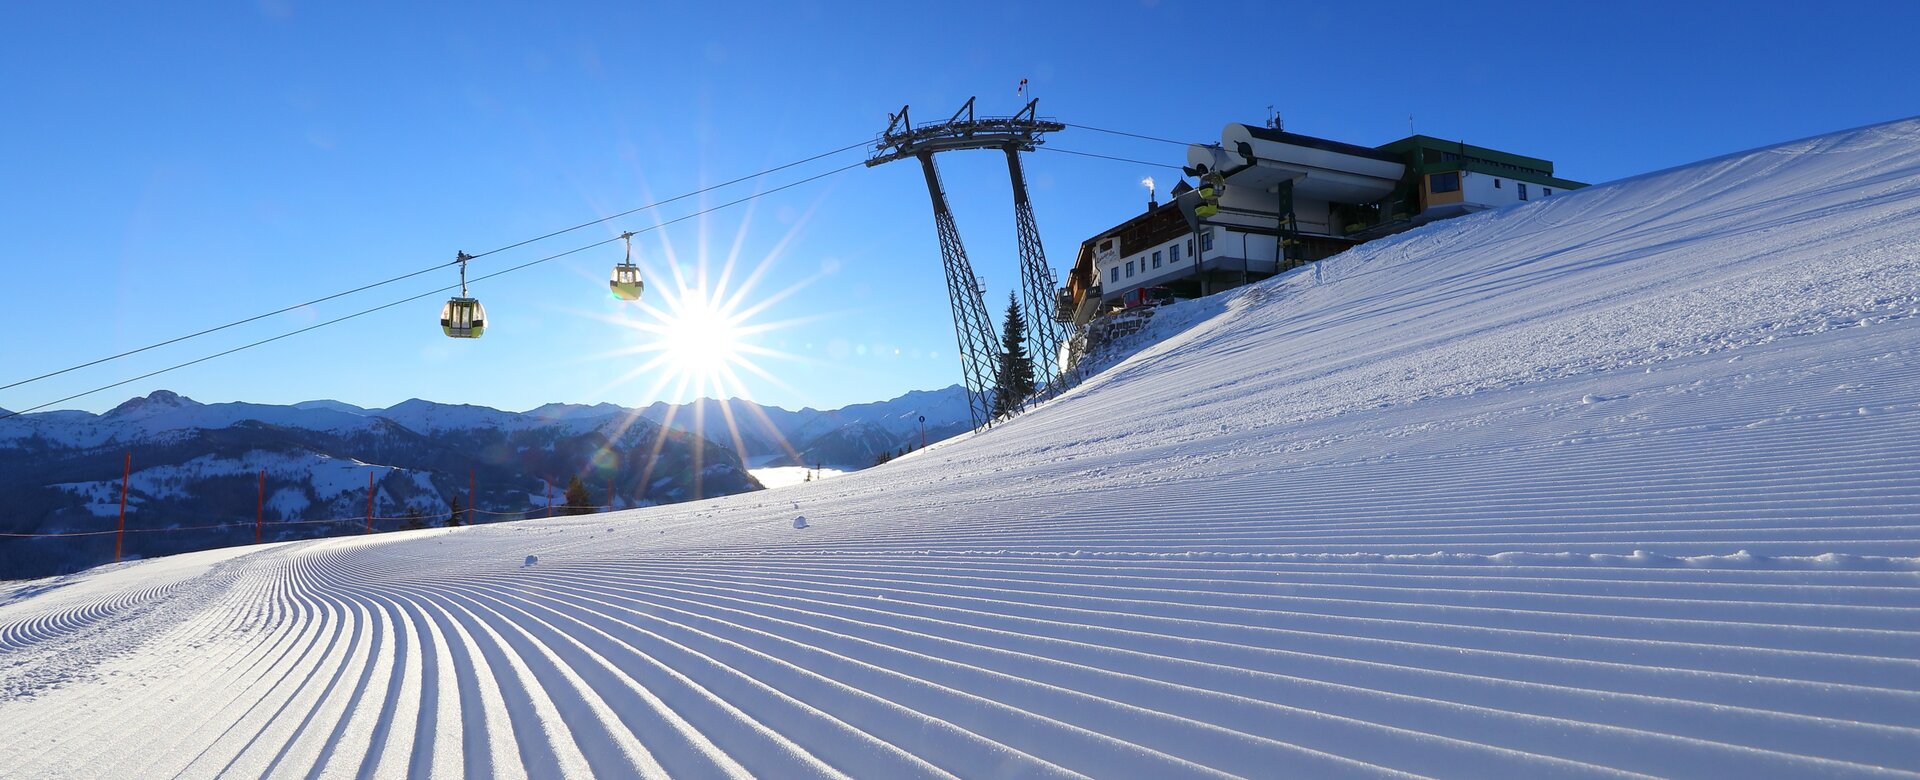 The rising sun illuminates the freshly prepared piste and the cable car passes over it | © Tourismusverband Großarltal